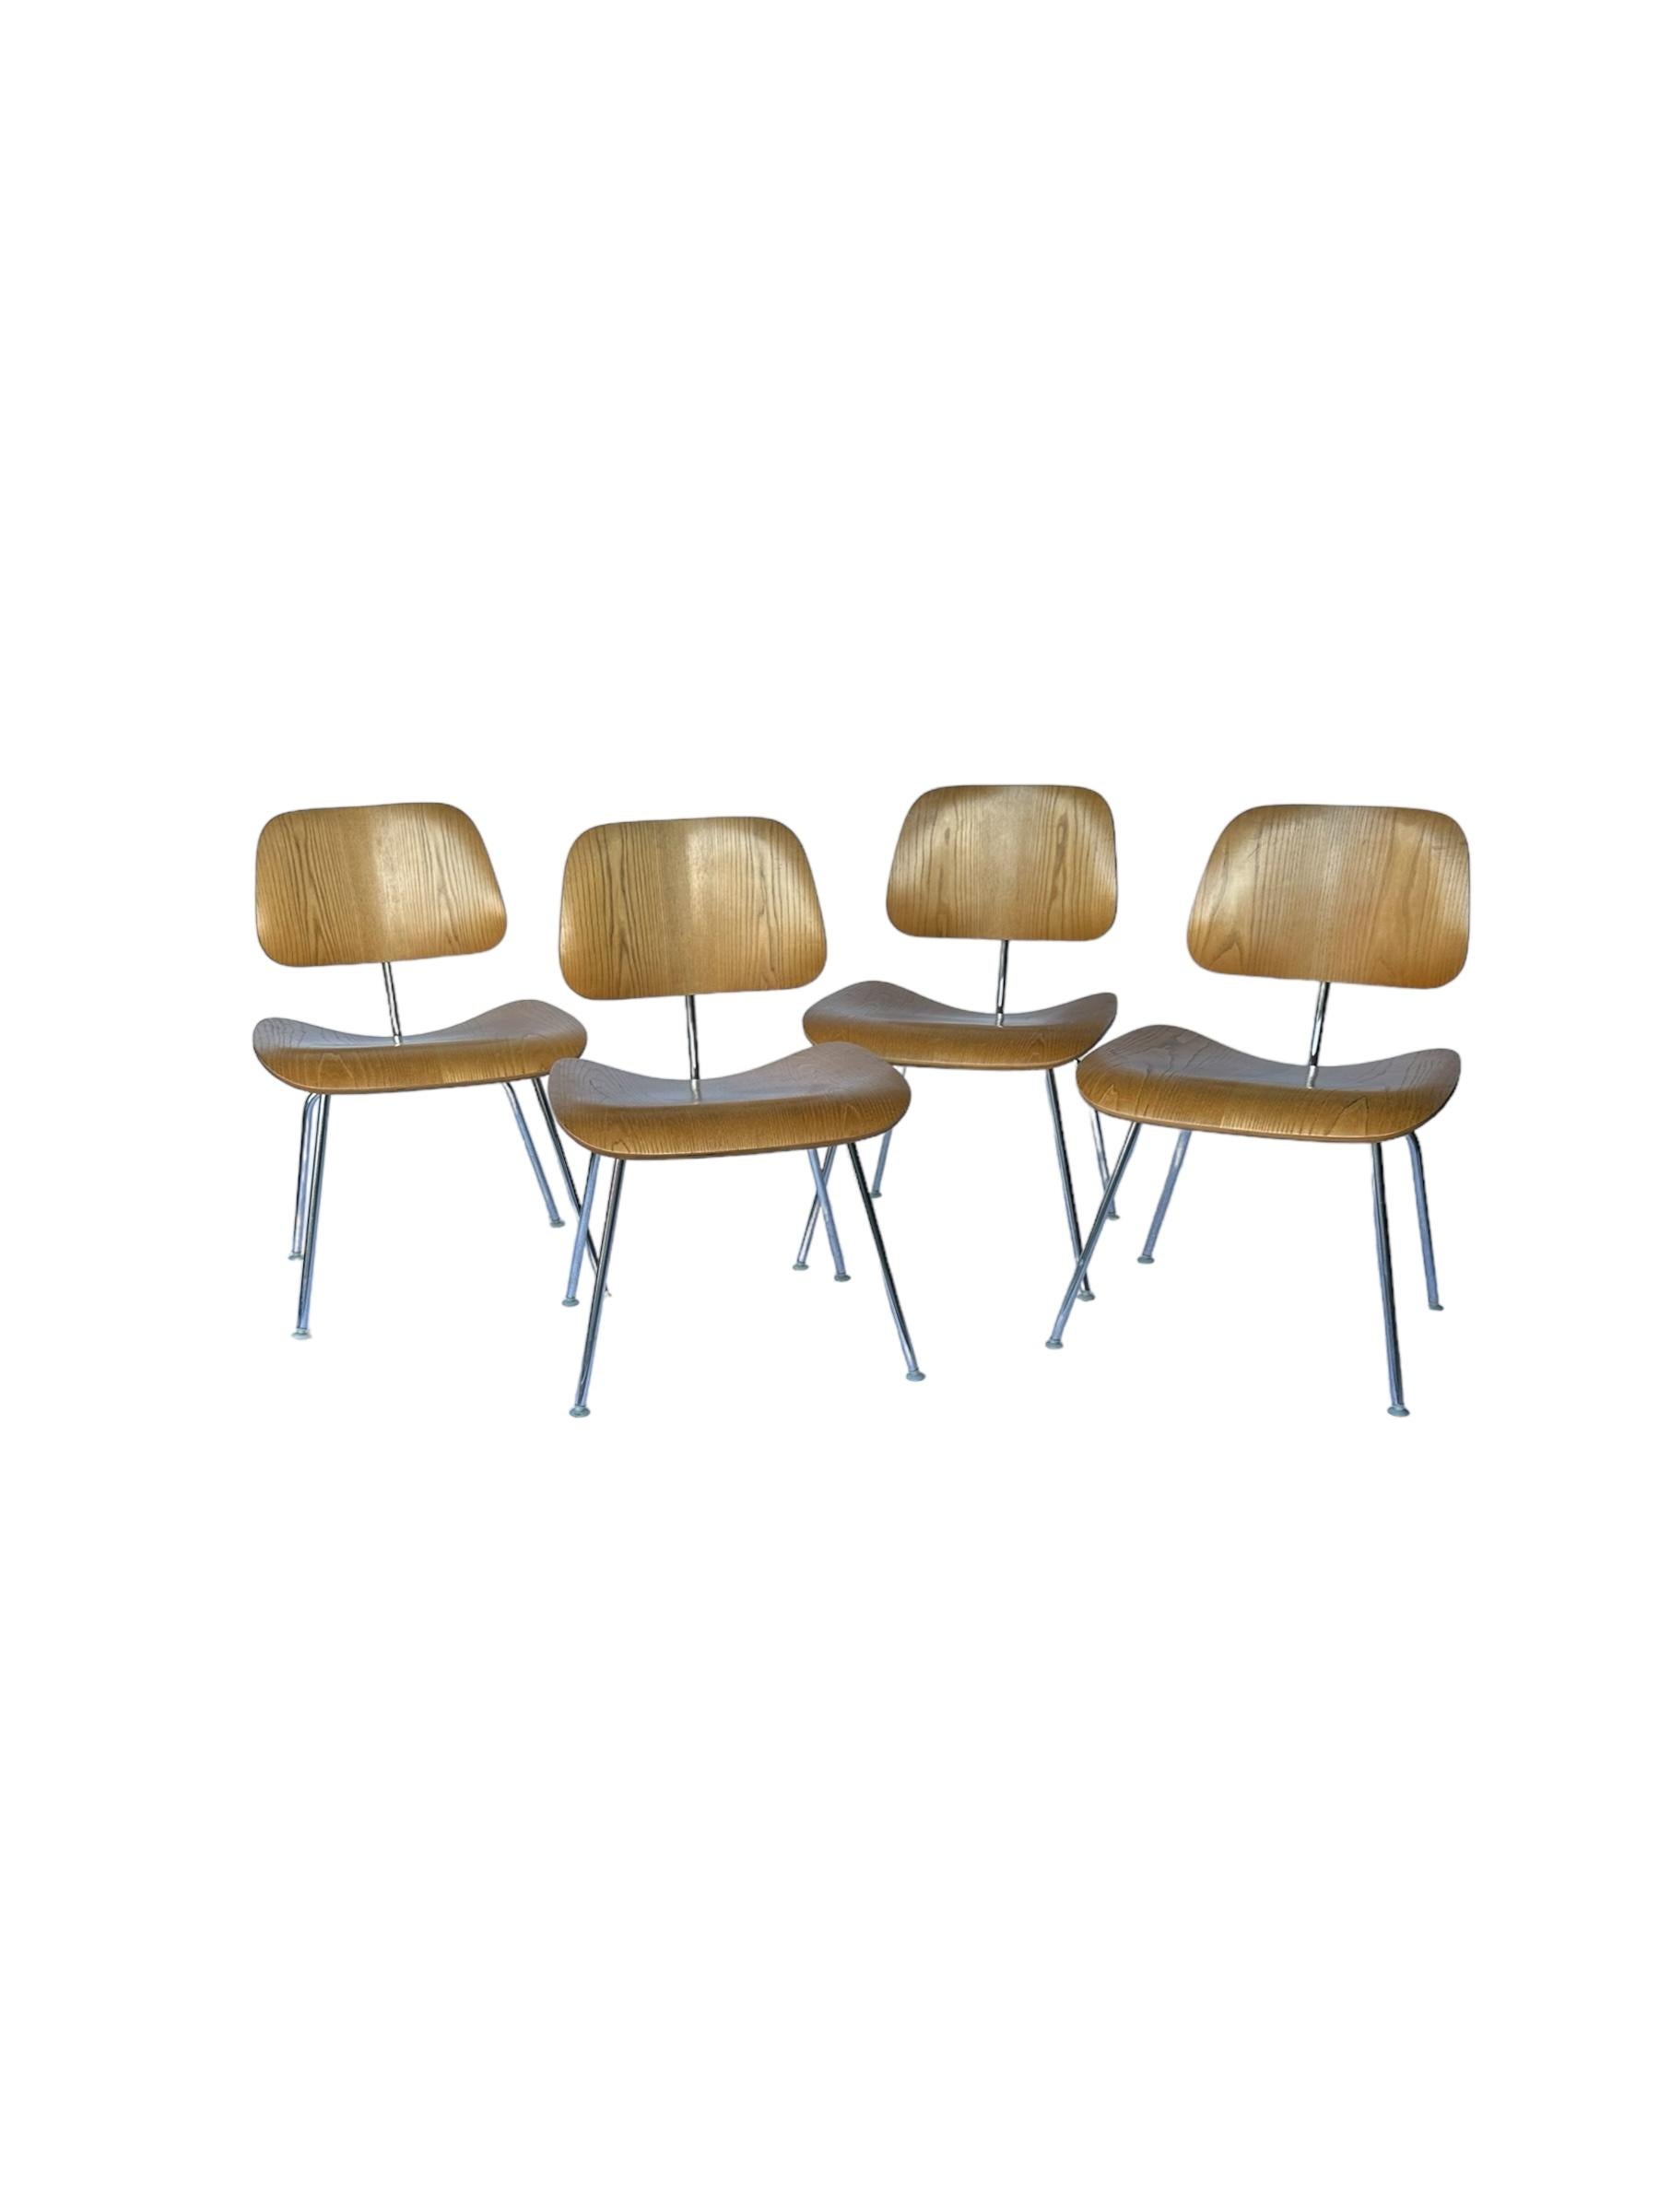 Set of Four Herman Miller Eames DCM Dining Chairs In Fair Condition For Sale In Brooklyn, NY